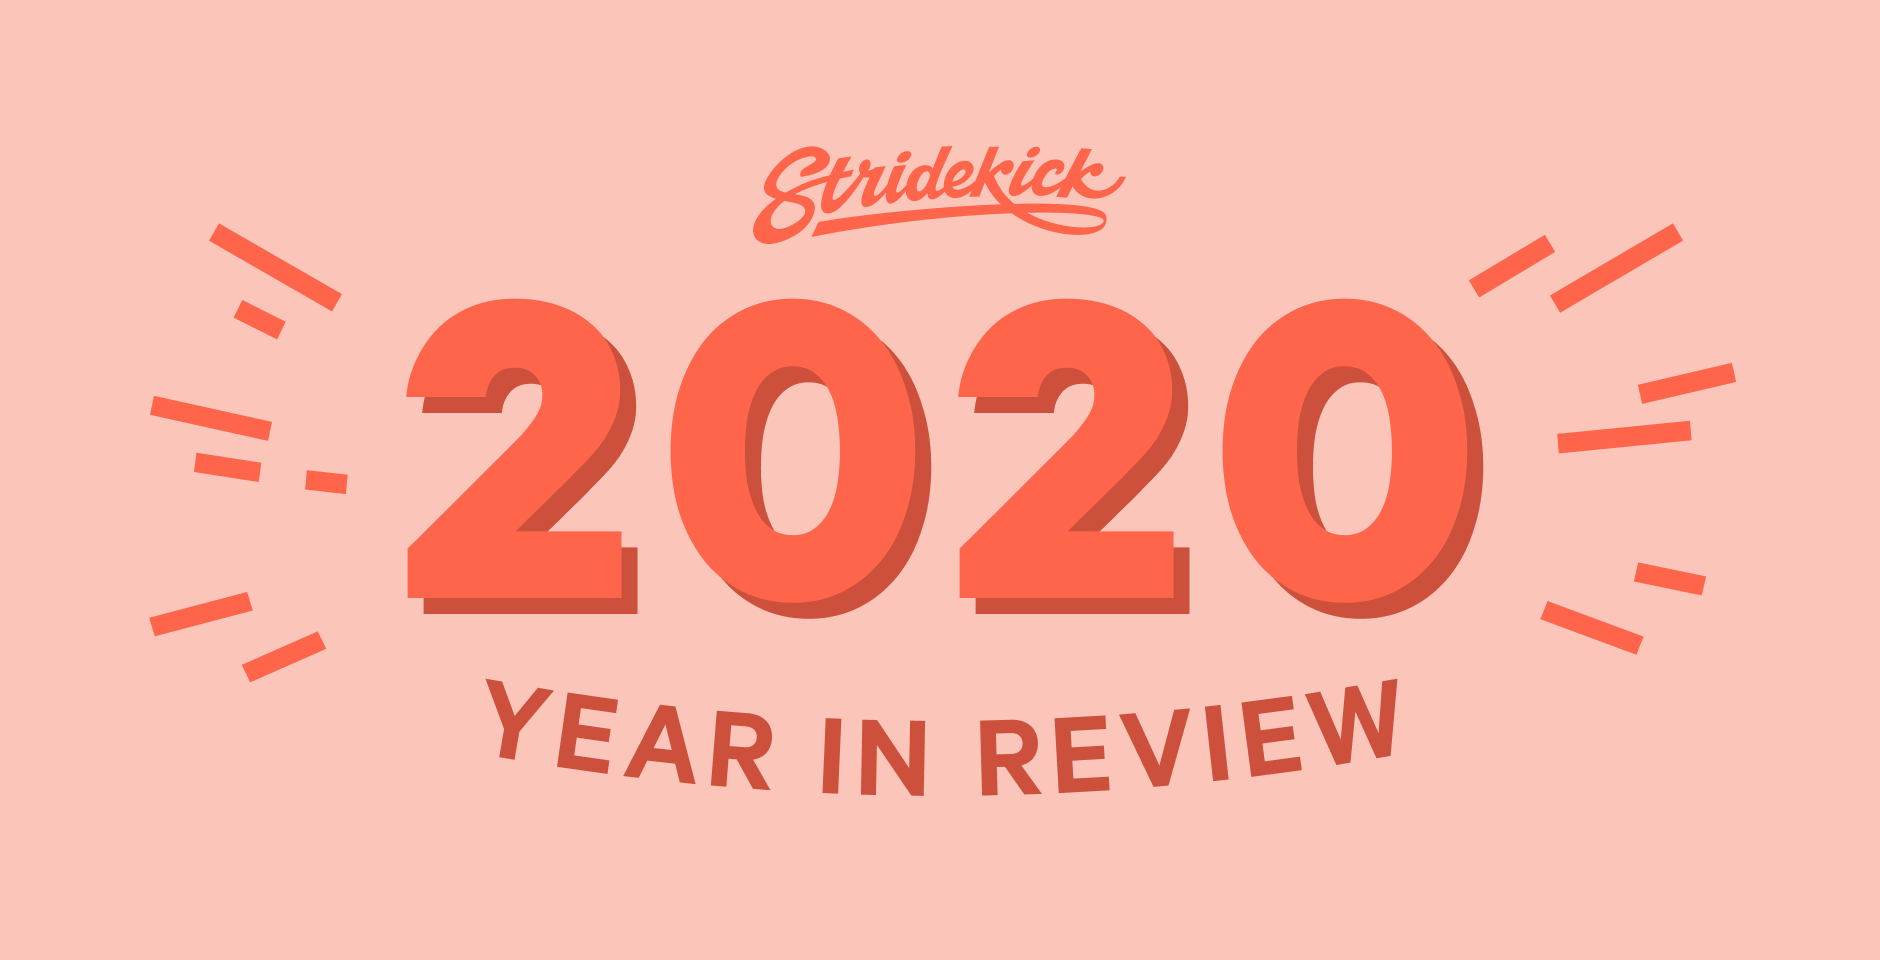 2020 Year in Review banner image